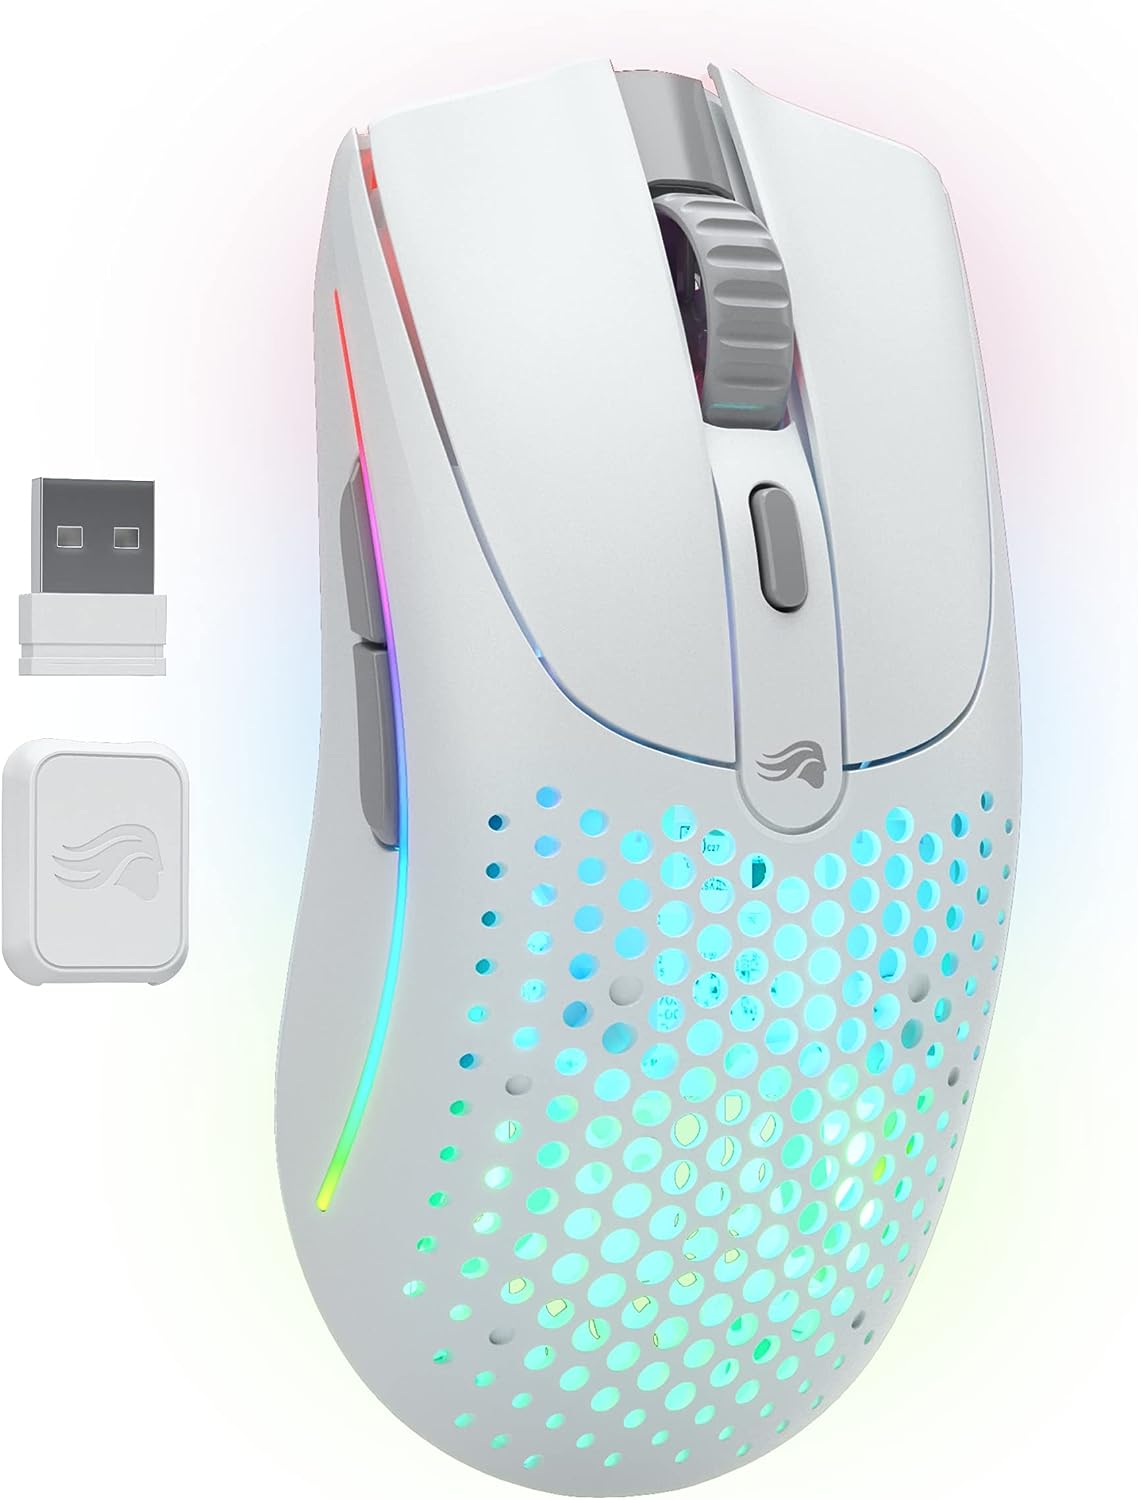 rand Glorious PC Gaming Race Color White Connectivity Technology 2.4GHz Wireless, Bluetooth Special Feature Wireless, Lightweight, Ambidextrous, Customizable RGB Movement Detection Technology Optical